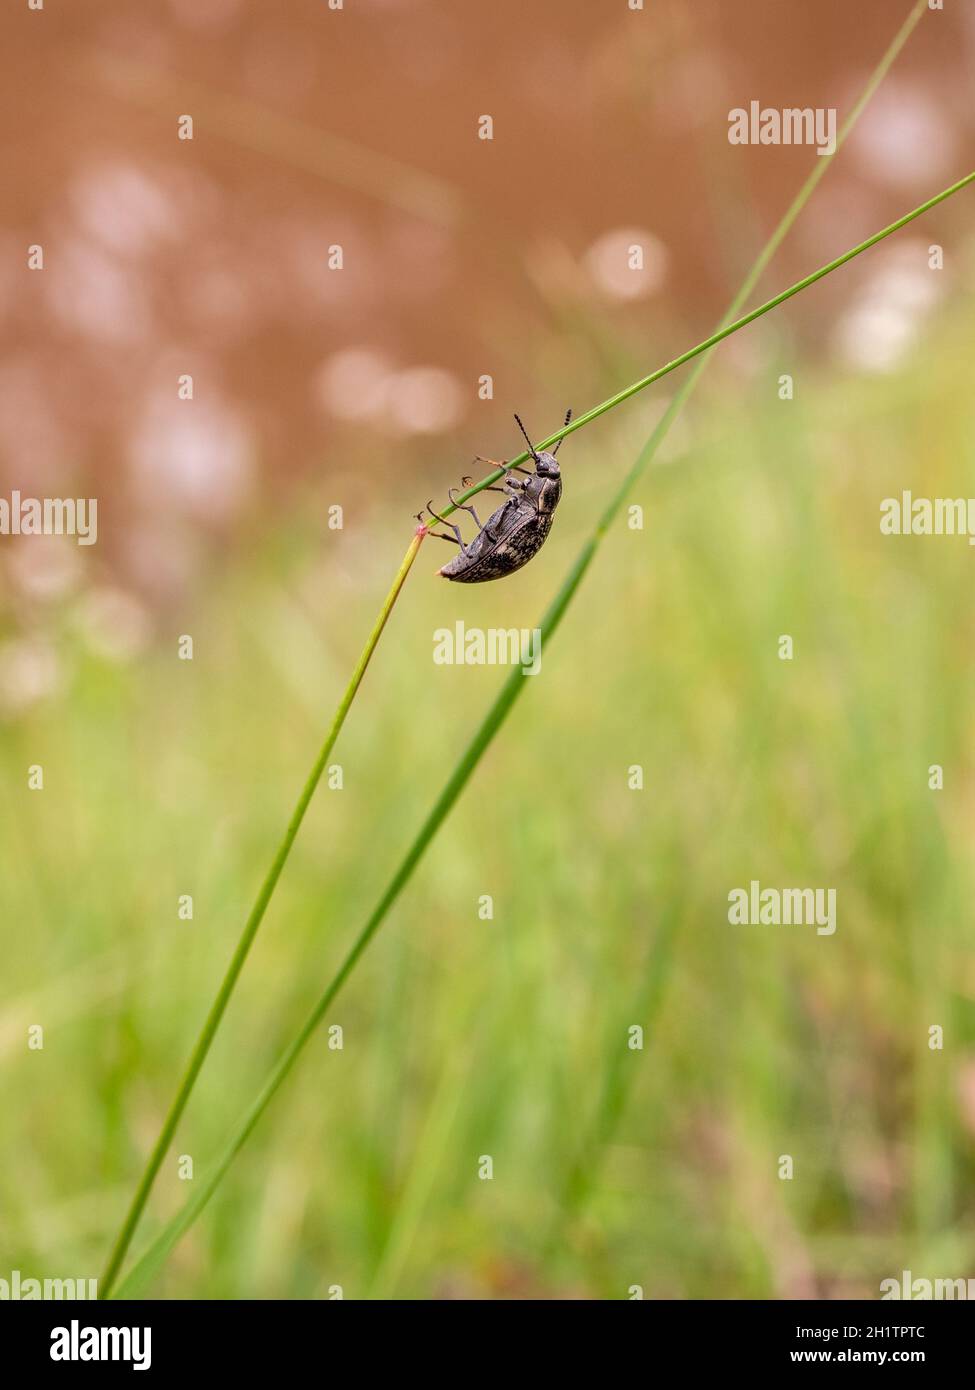 A Weevil on a grass stem in Victoria, Australia Stock Photo